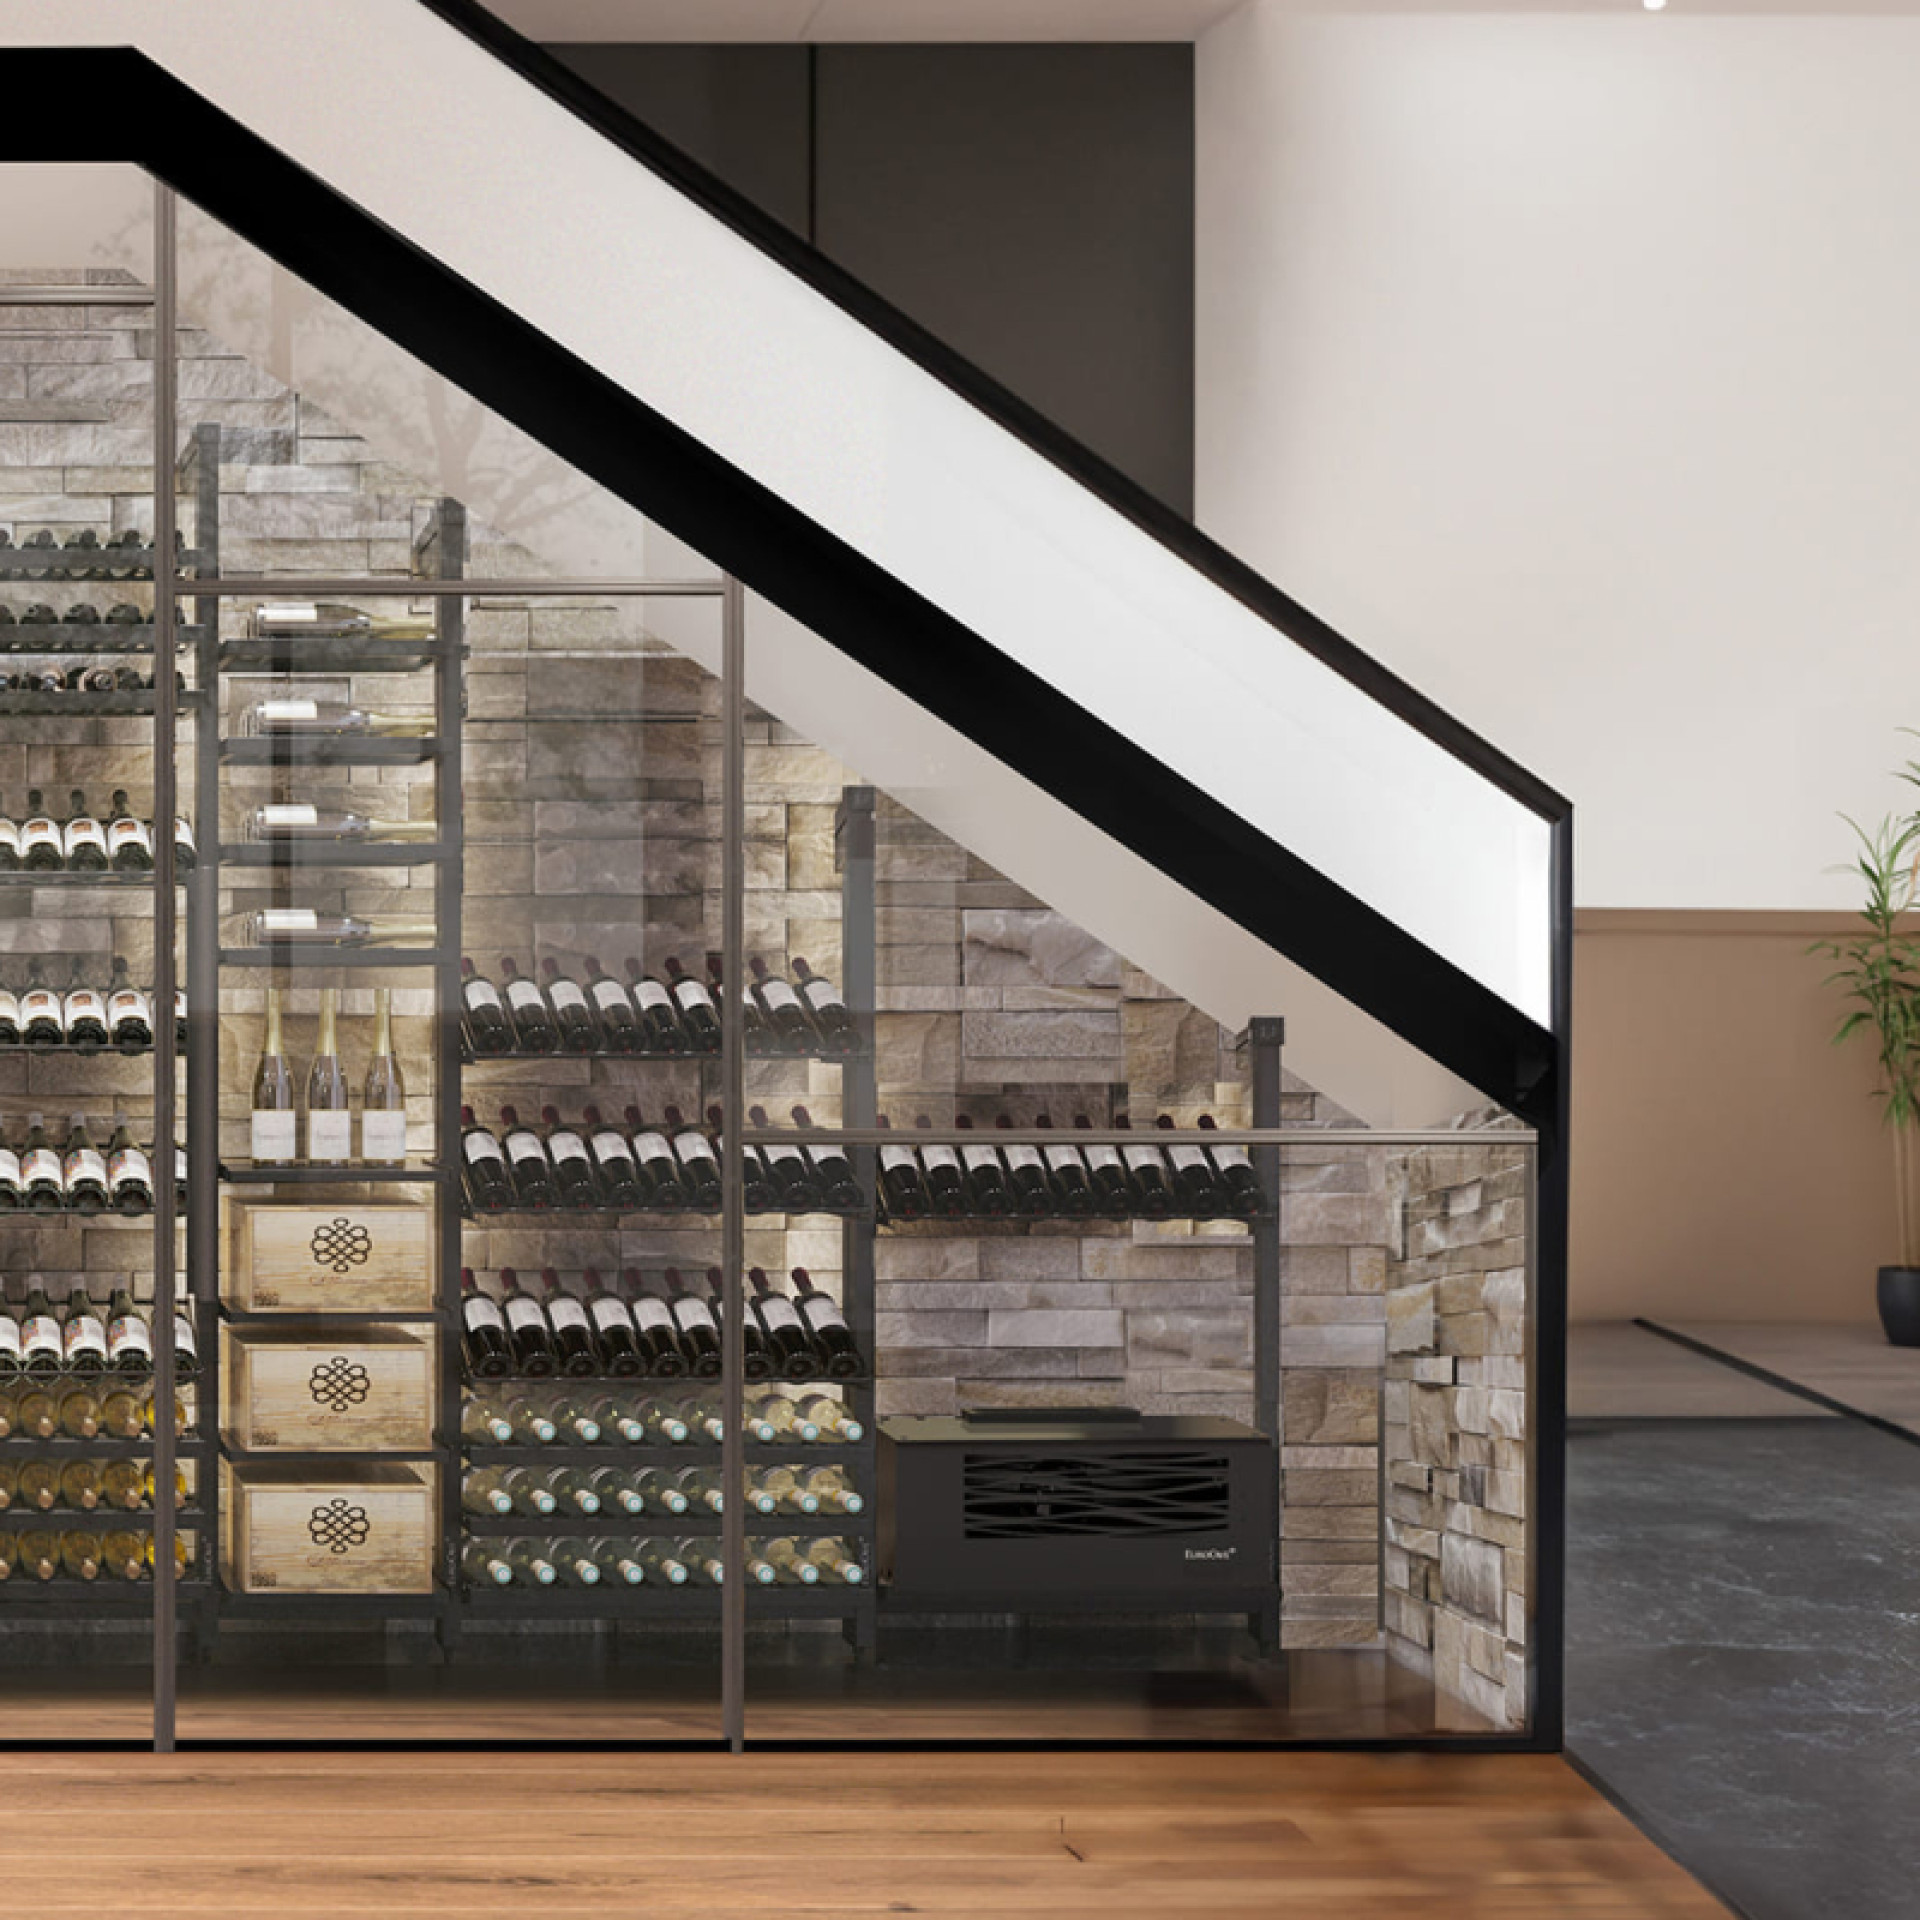 Split water wine cellar air conditioners with chilled water circuit for small volumes from 2m3: display cases, space under stairs, custom furniture. Small footprint. Choice of ventilation direction. Optional humidifier kit. Remote control by remote control.